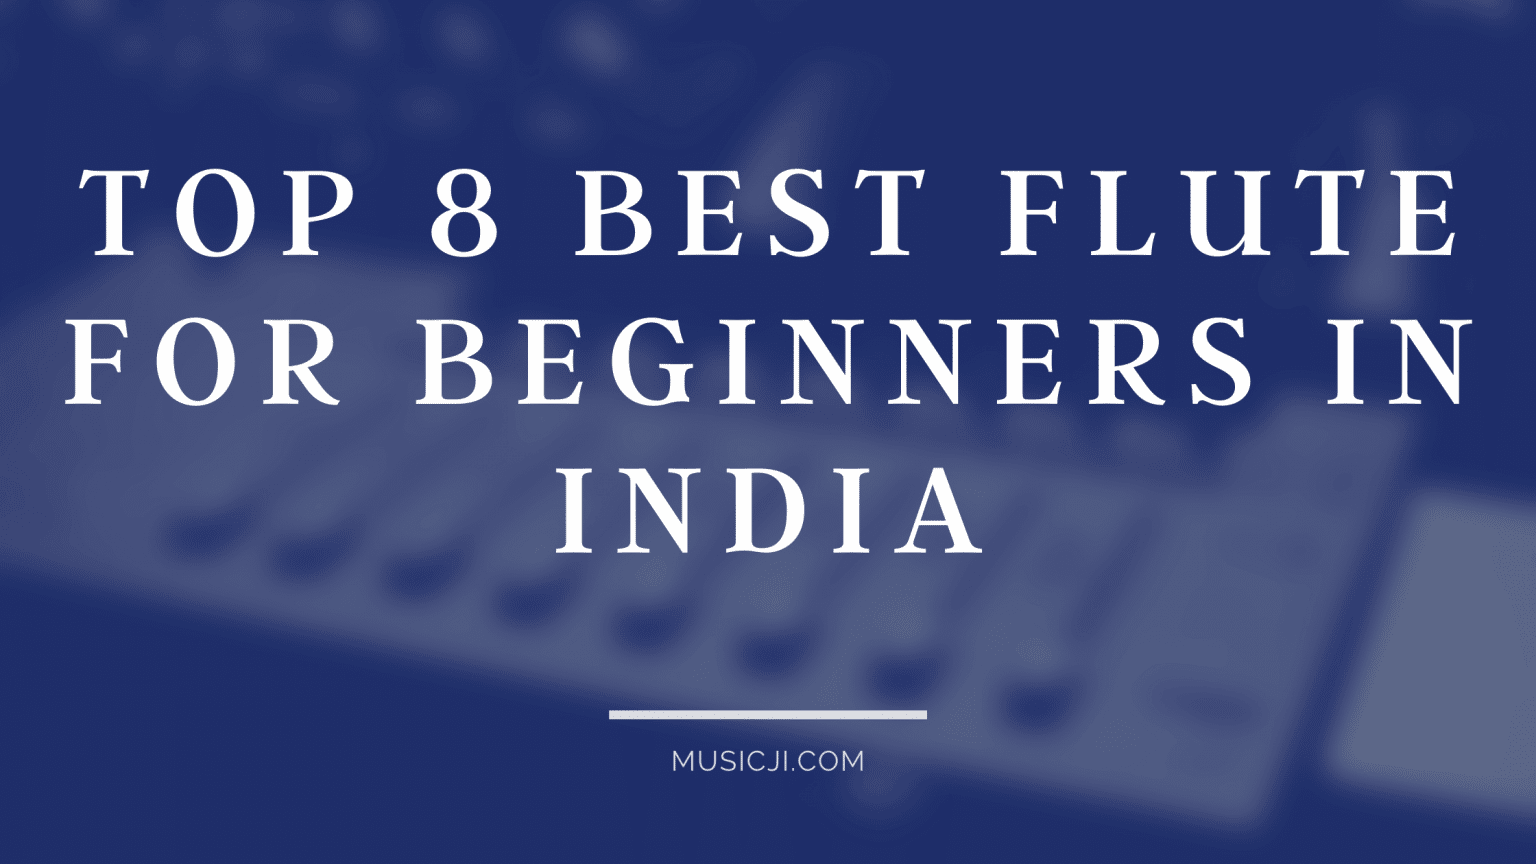 Top 8 Best Flute for Beginners in India